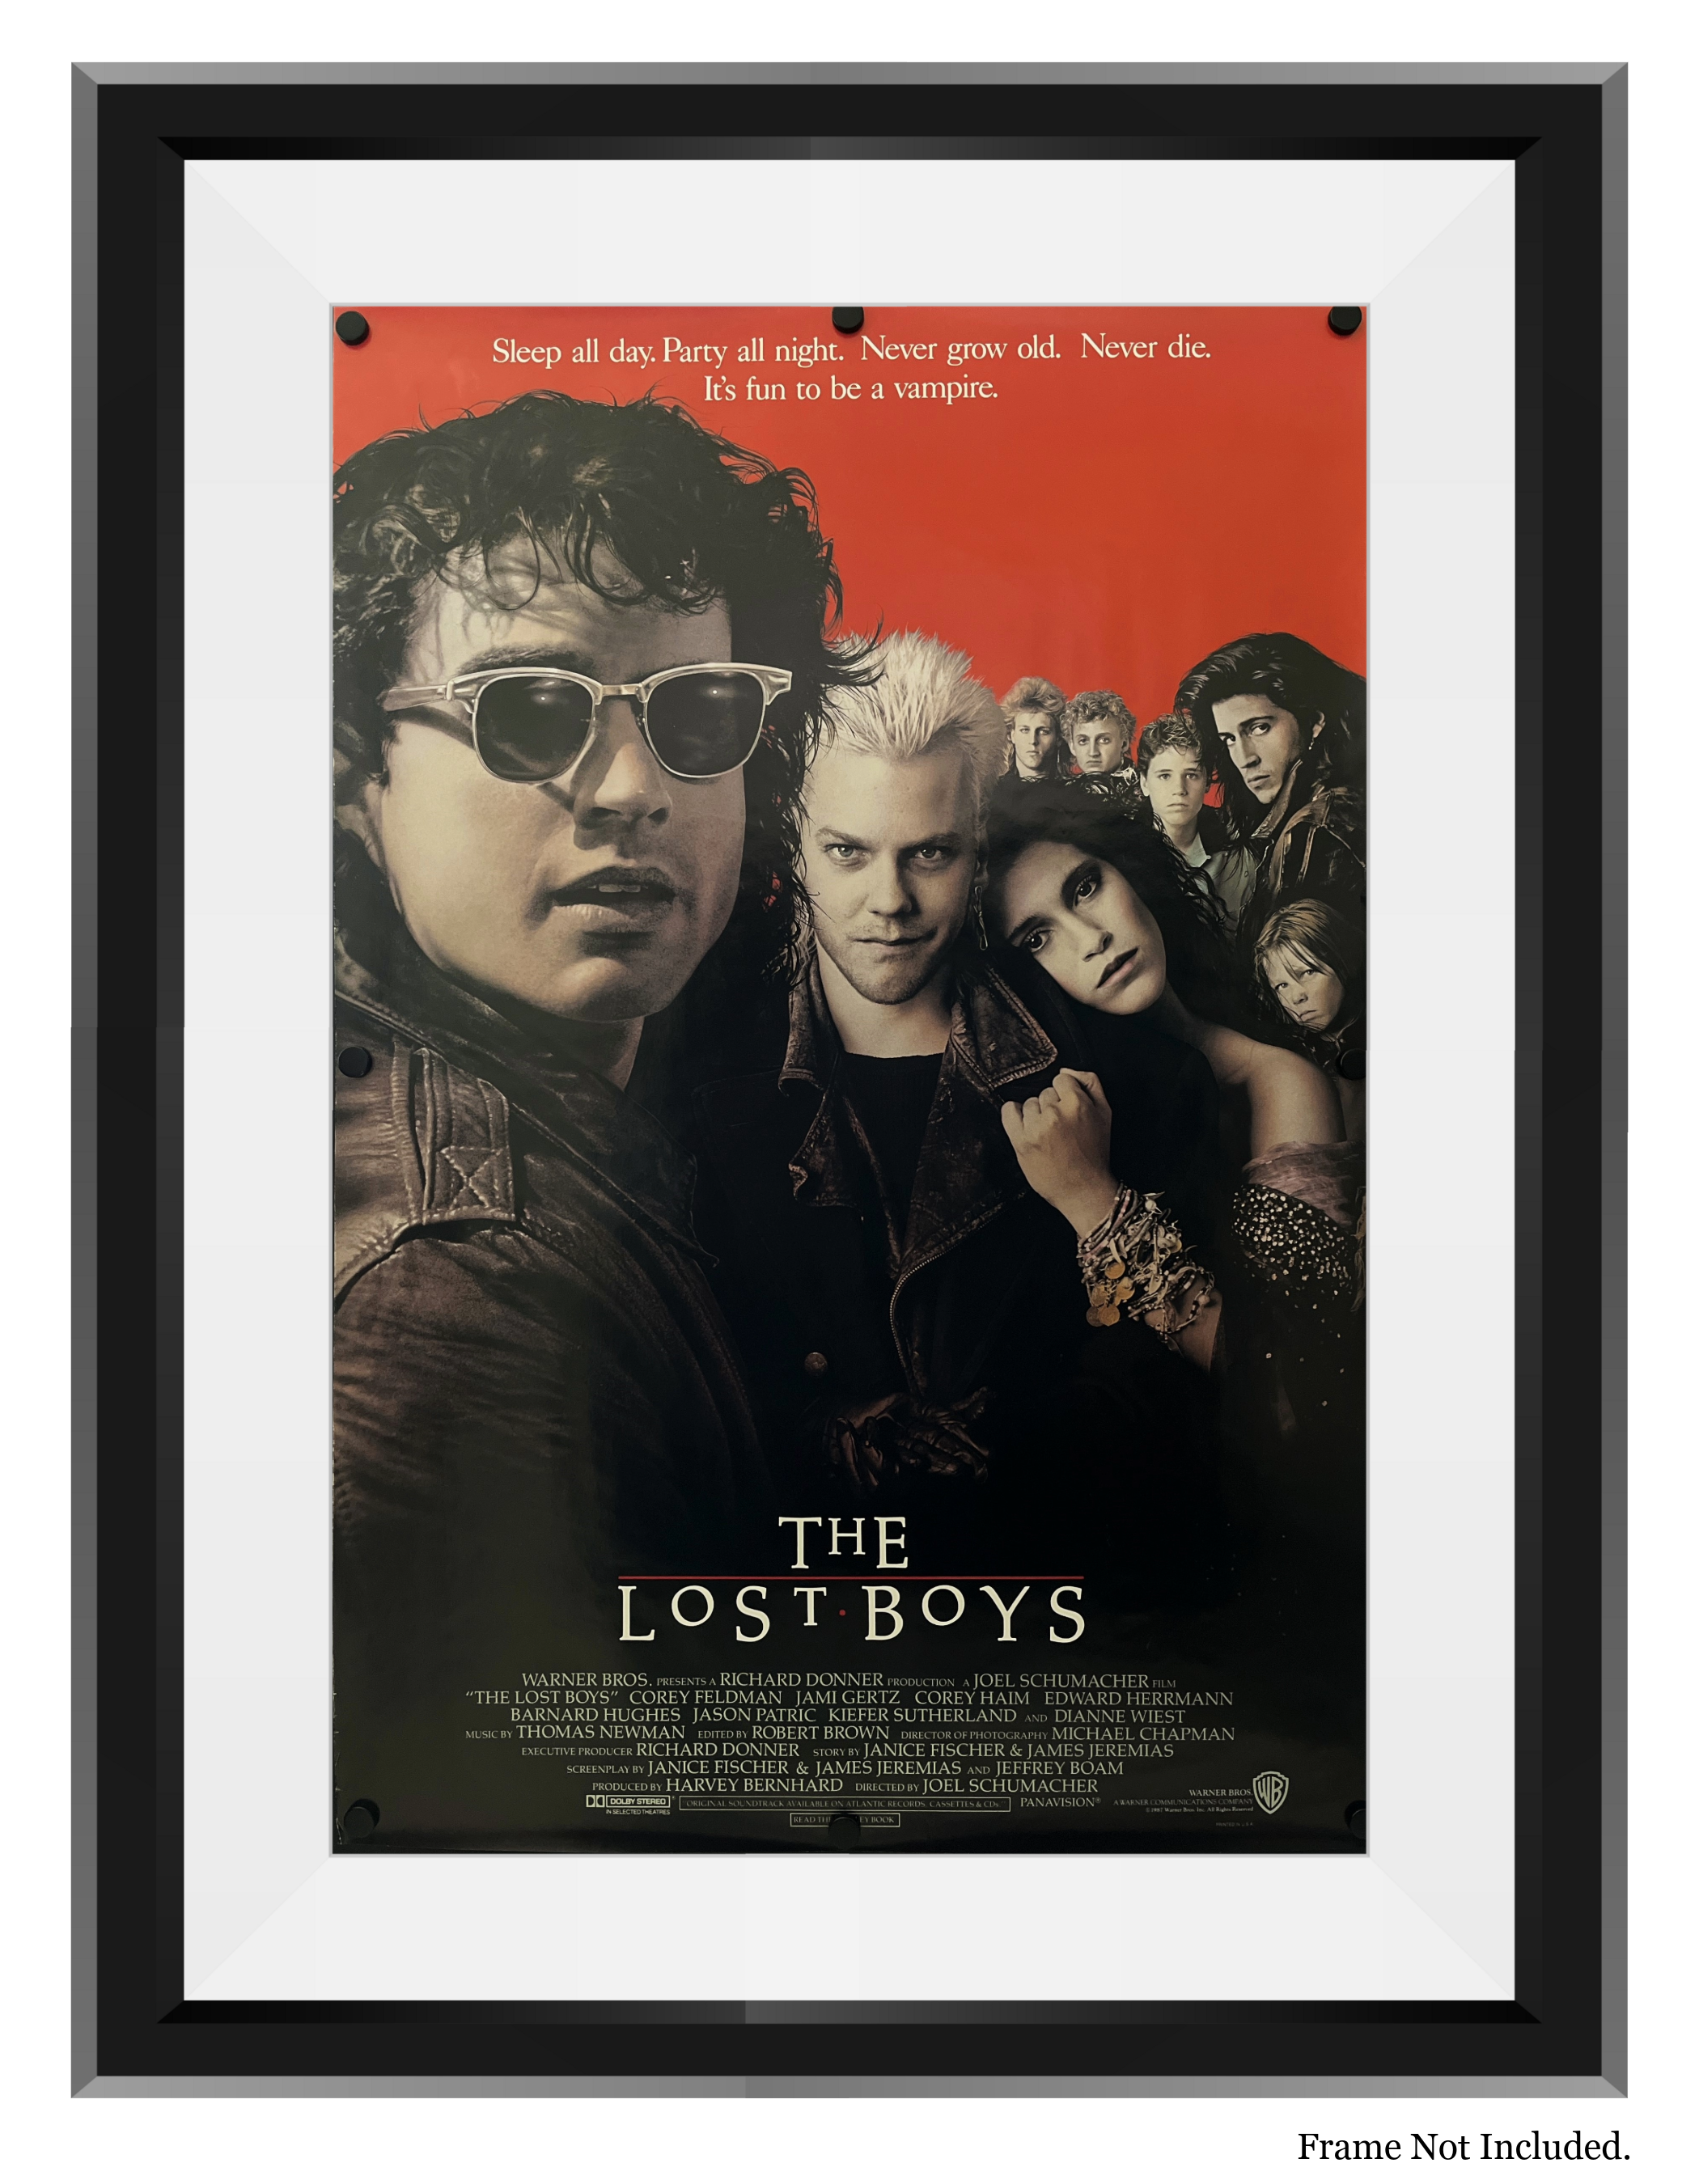 THE LOST BOYS (1987)